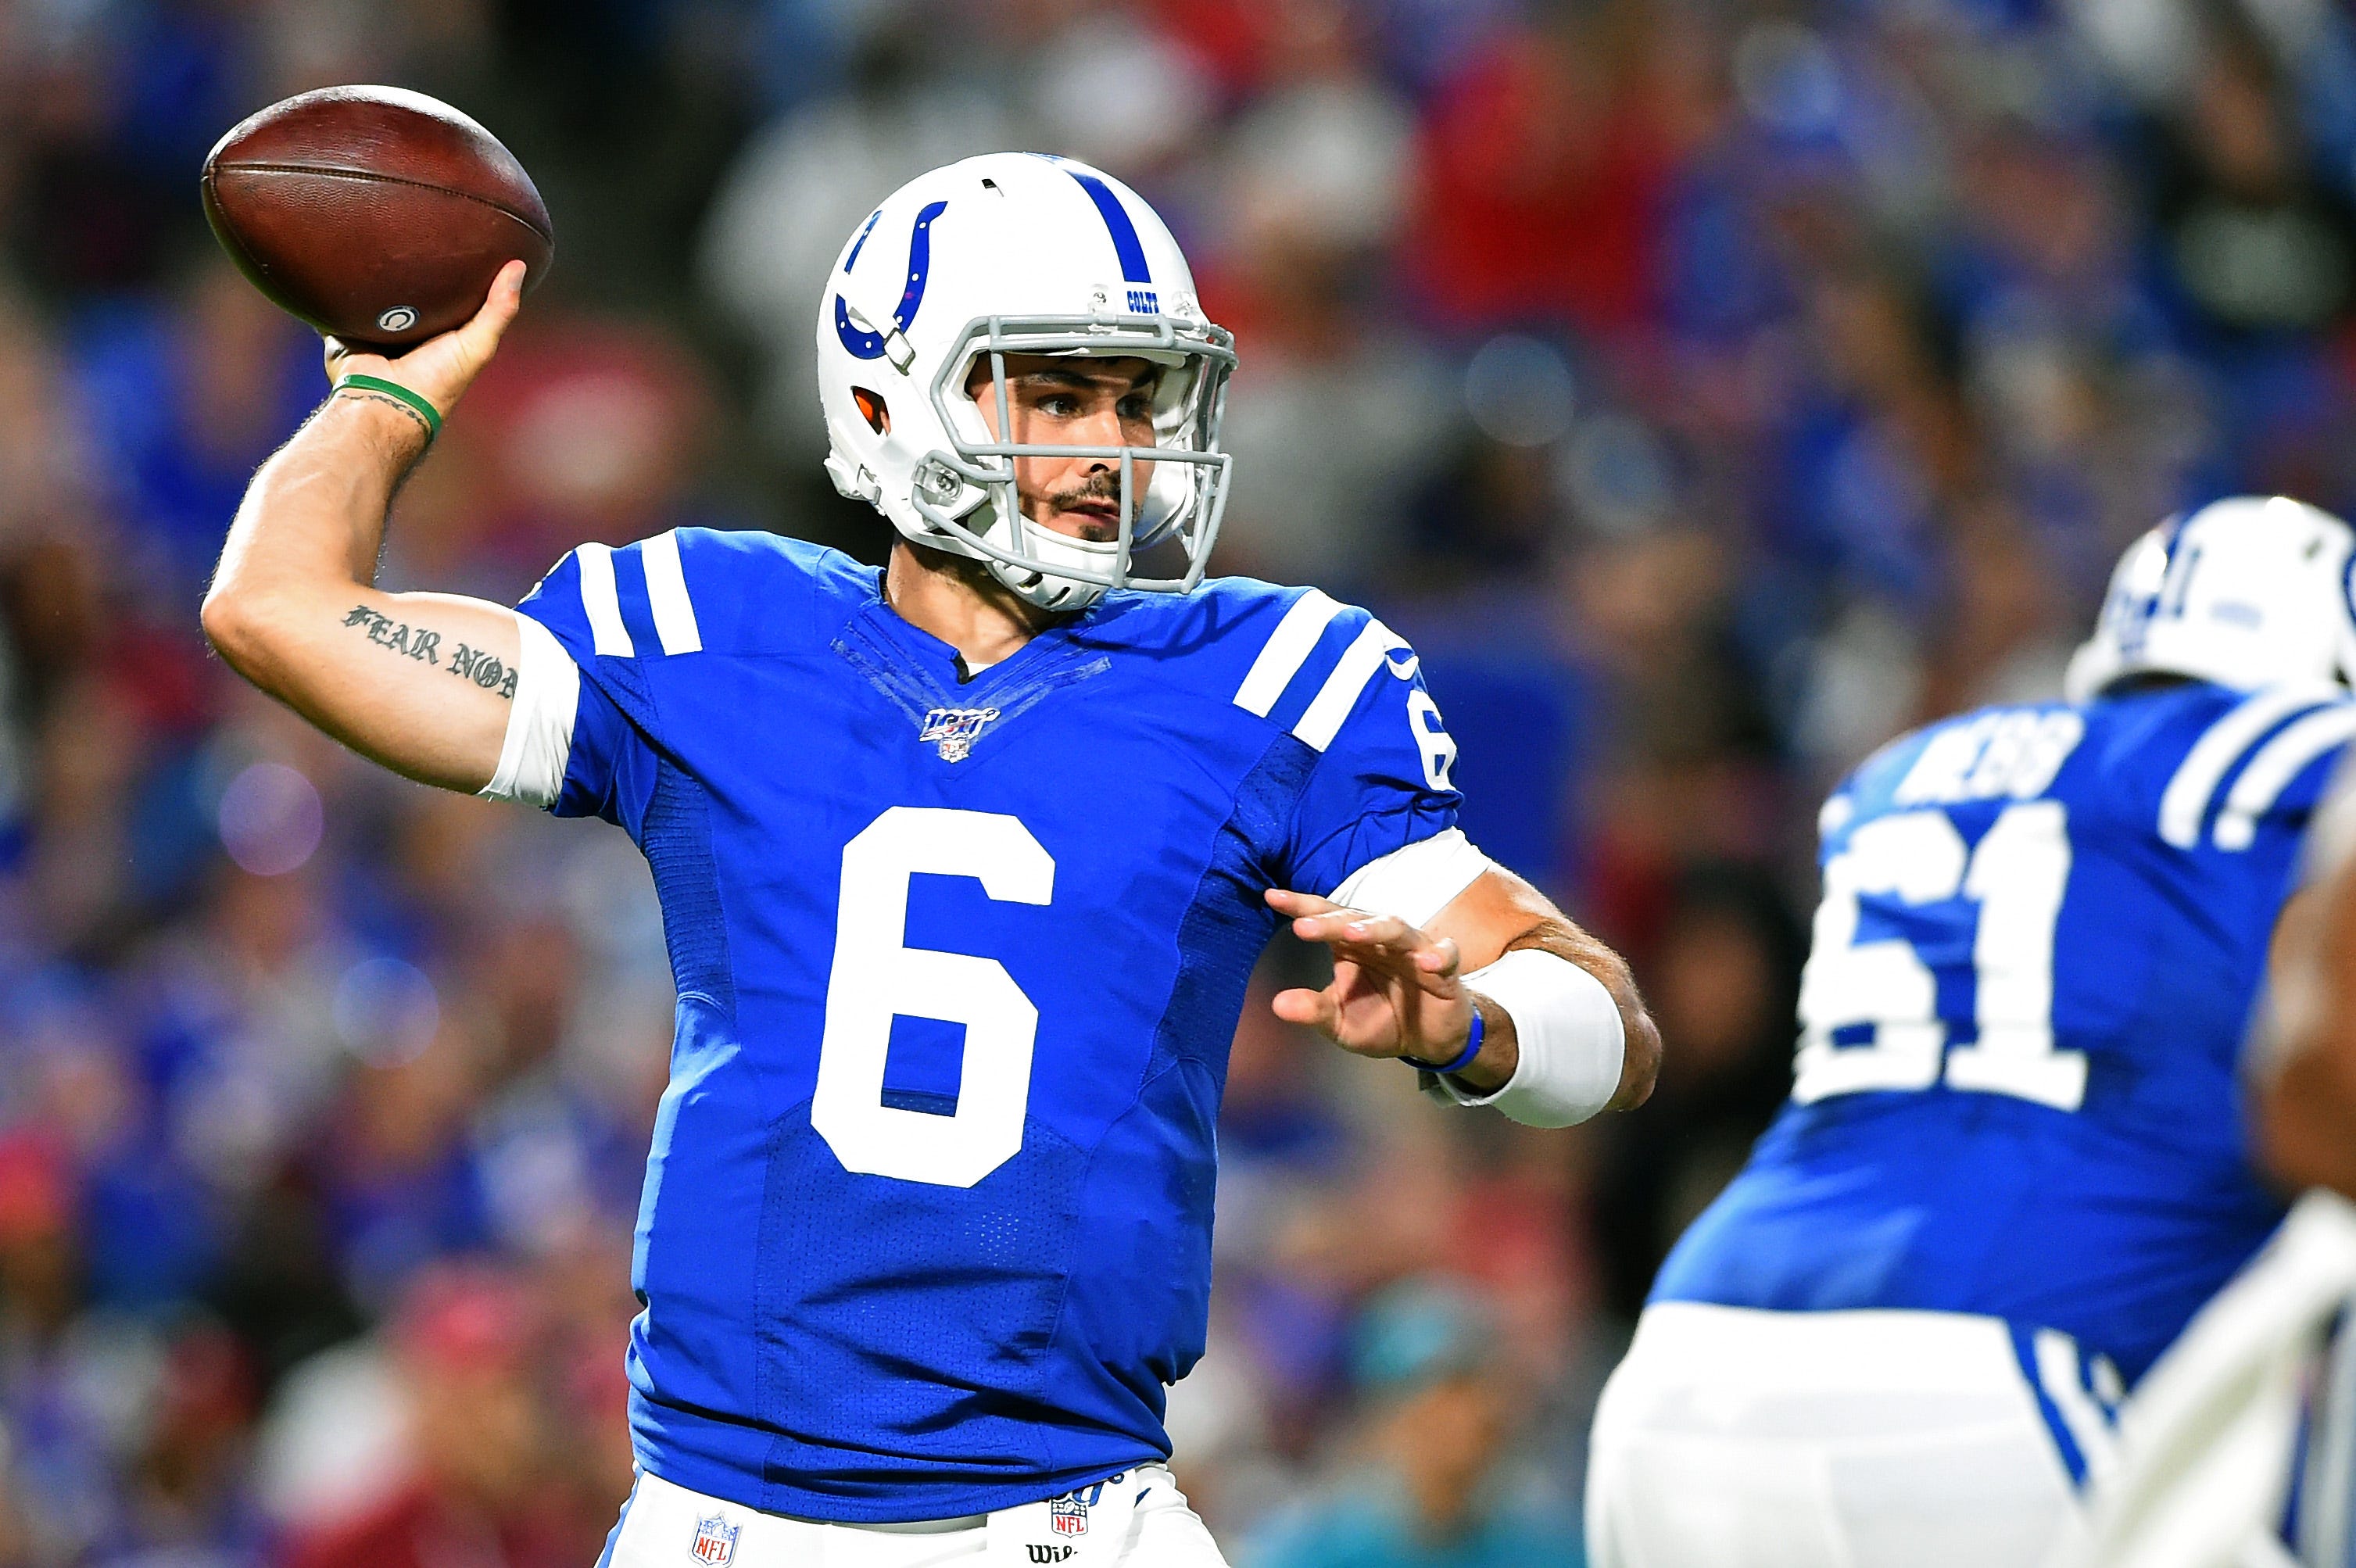 Colts quarterback Chad Kelly shines in 